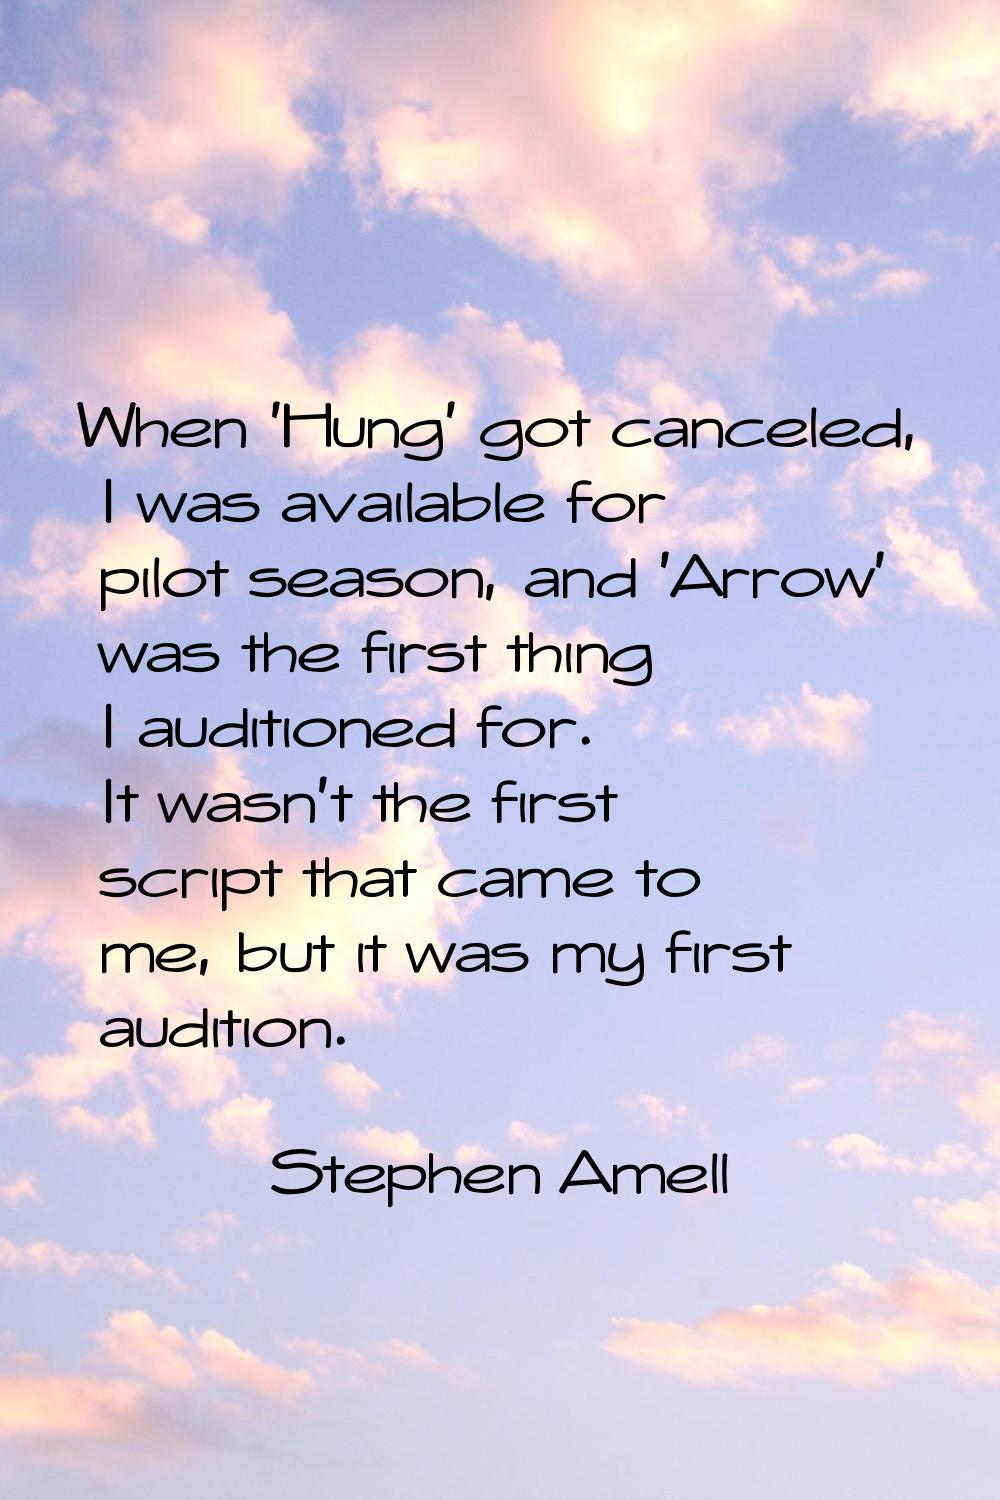 When 'Hung' got canceled, I was available for pilot season, and 'Arrow' was the first thing I audit